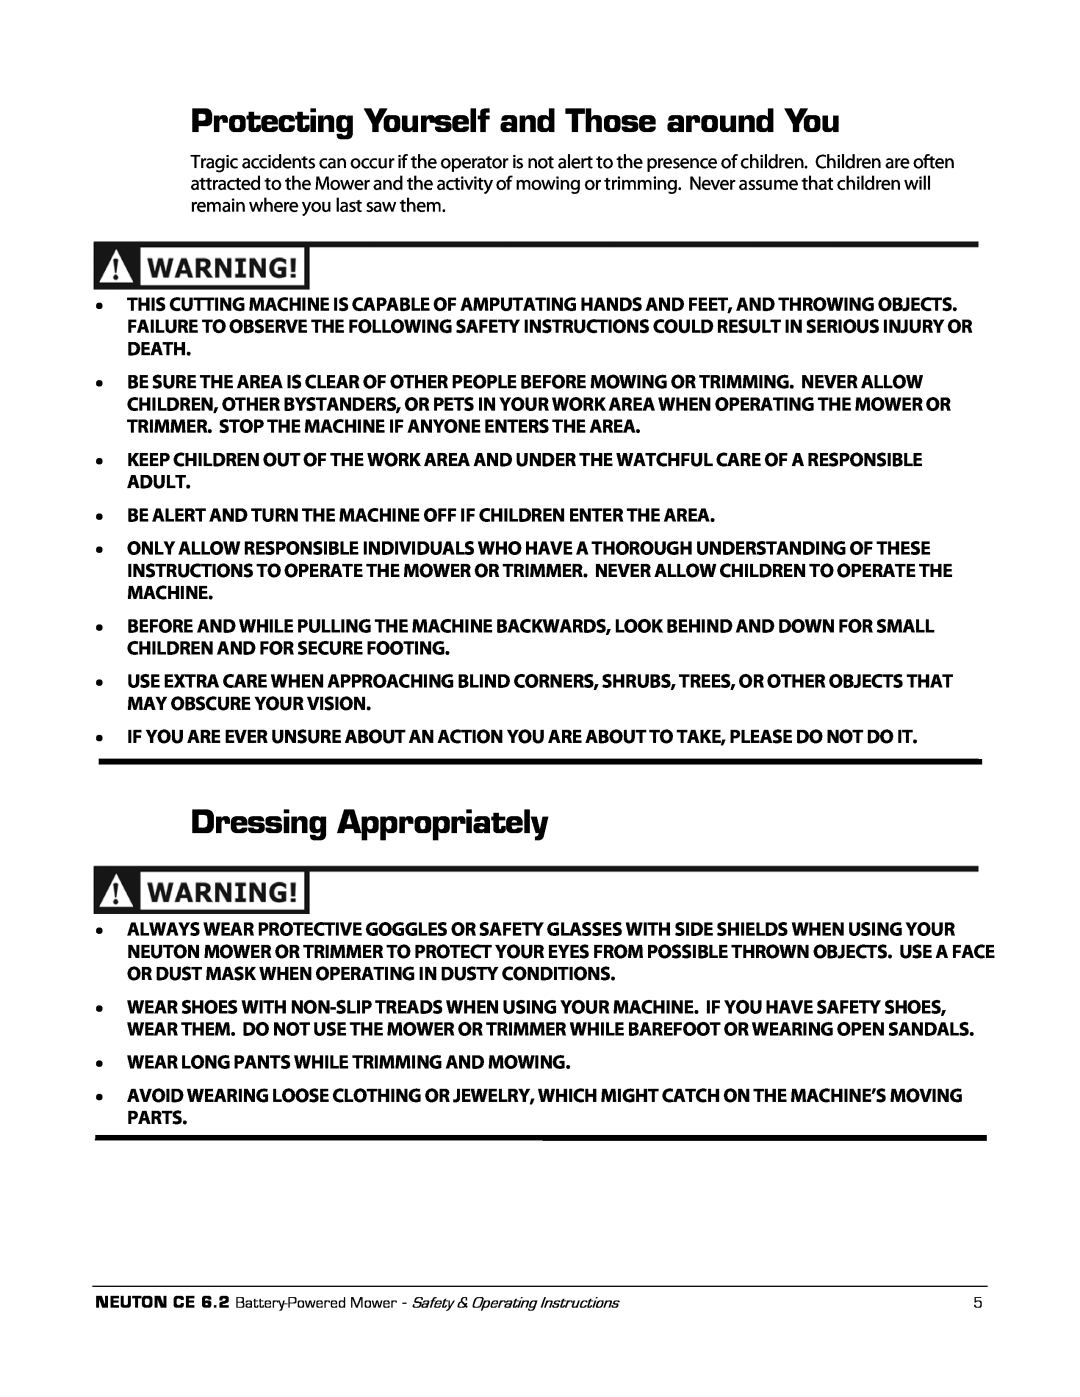 Neuton CE 6.2 manual Protecting Yourself and Those around You, Dressing Appropriately 